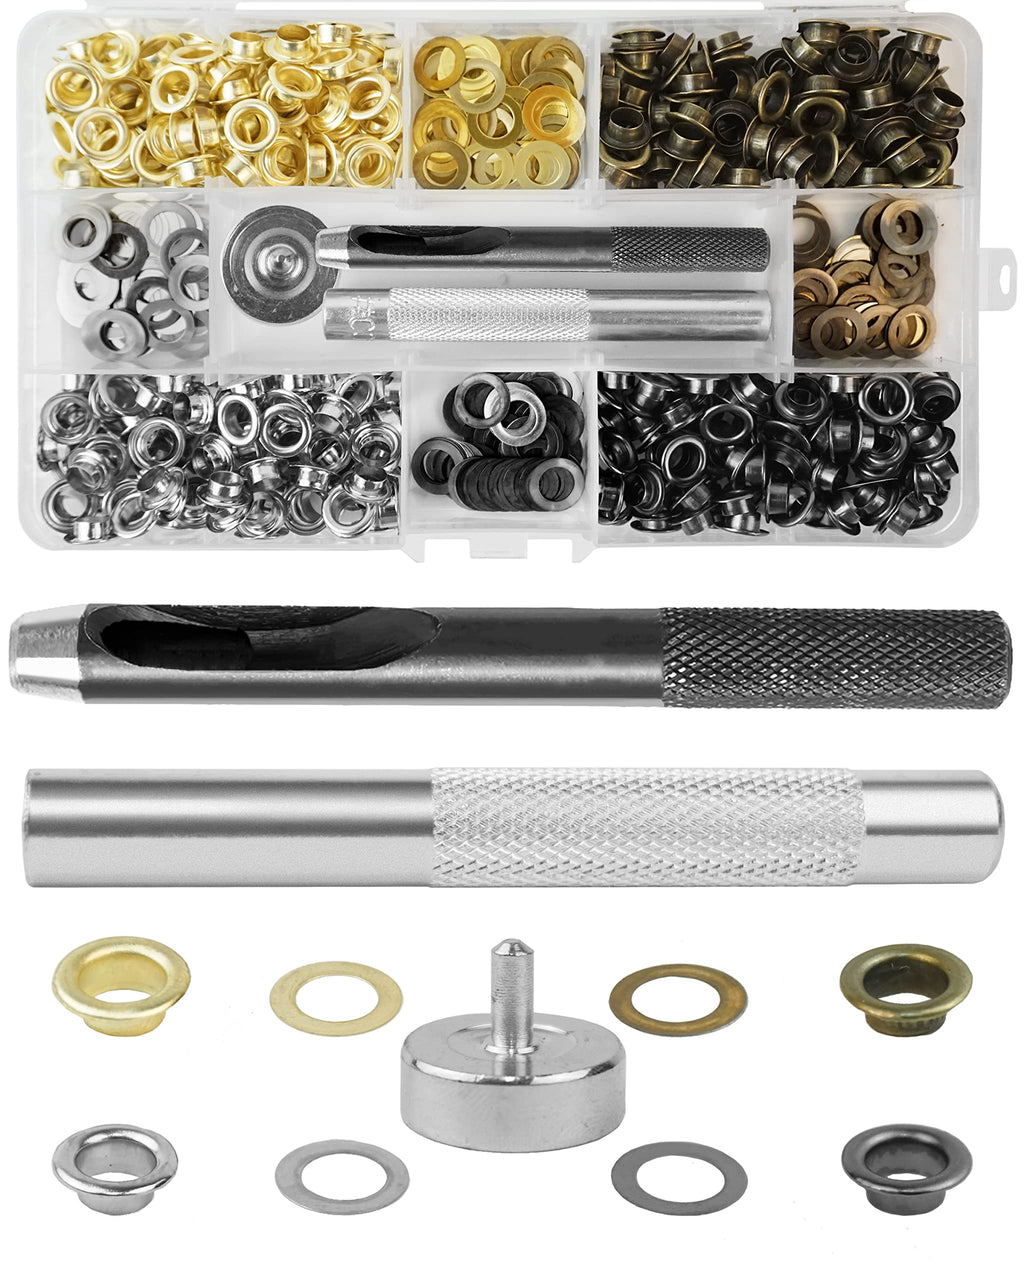 Grommet Tool Kit 1/4 Inch, 400 Sets Eyelets and Grommets in 4 Colors and 3 Pieces Installation Metal Grommet Tool with Storage Case by MoHern